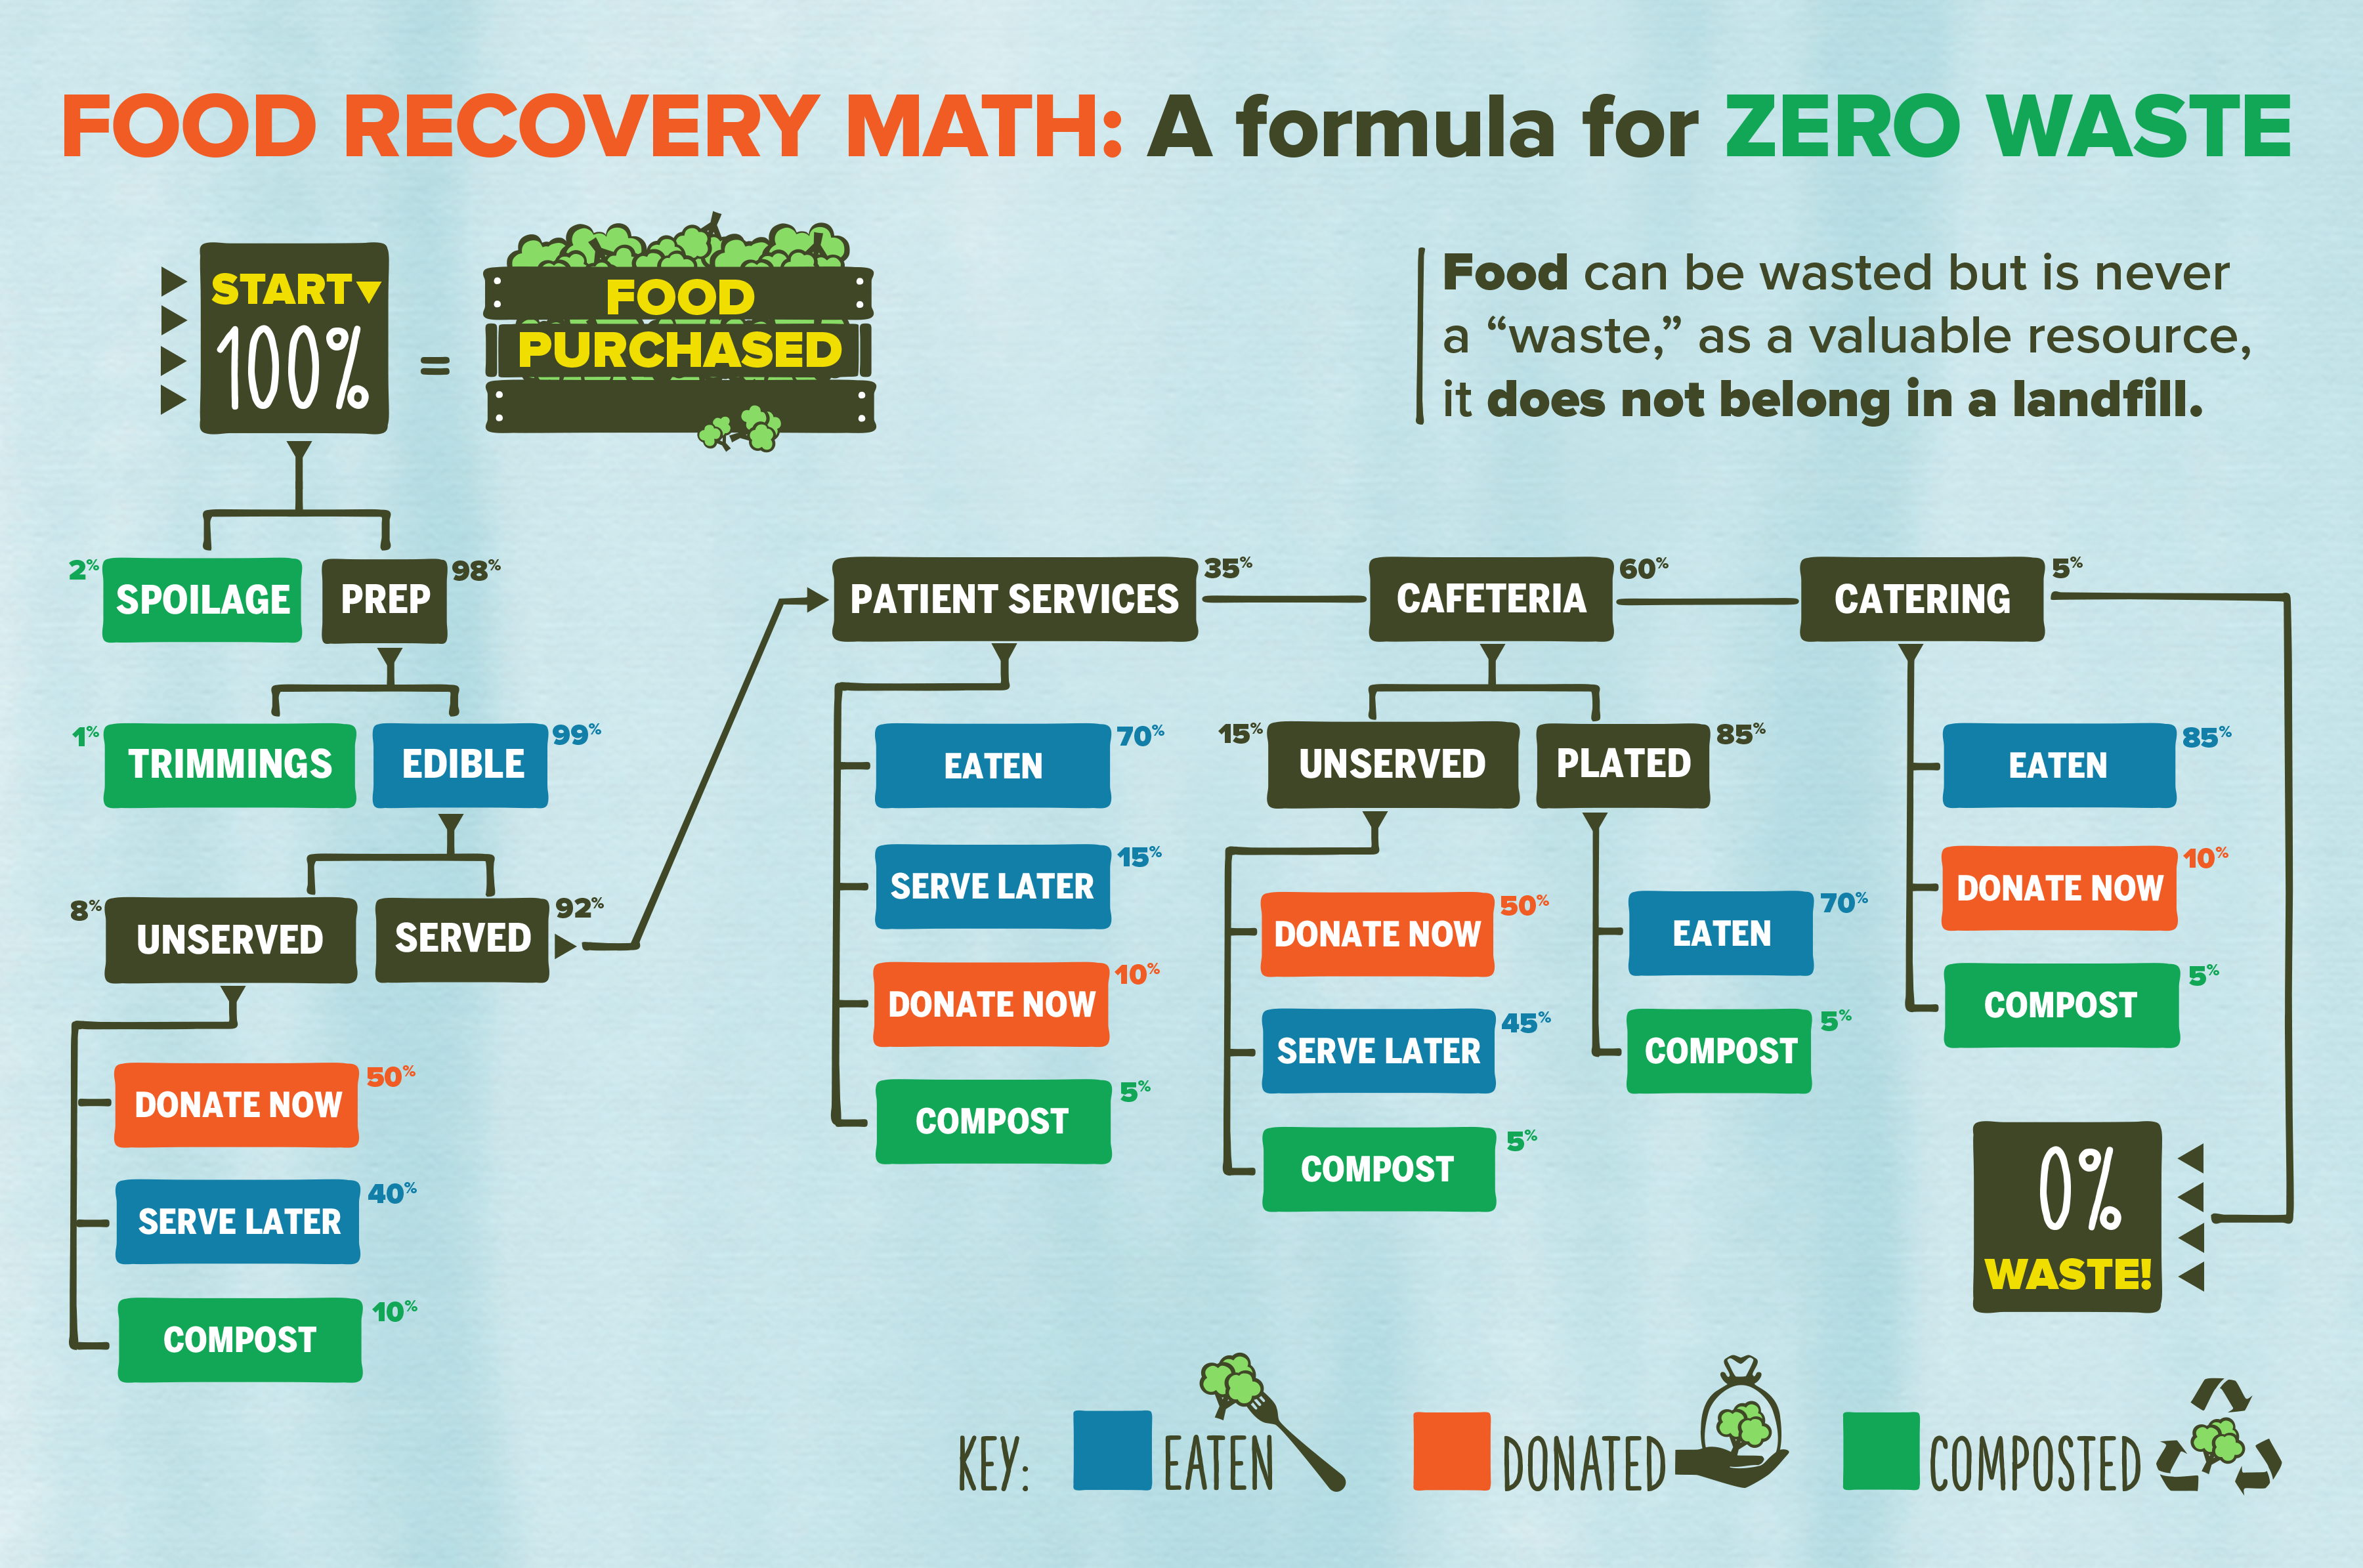 Food recovery math